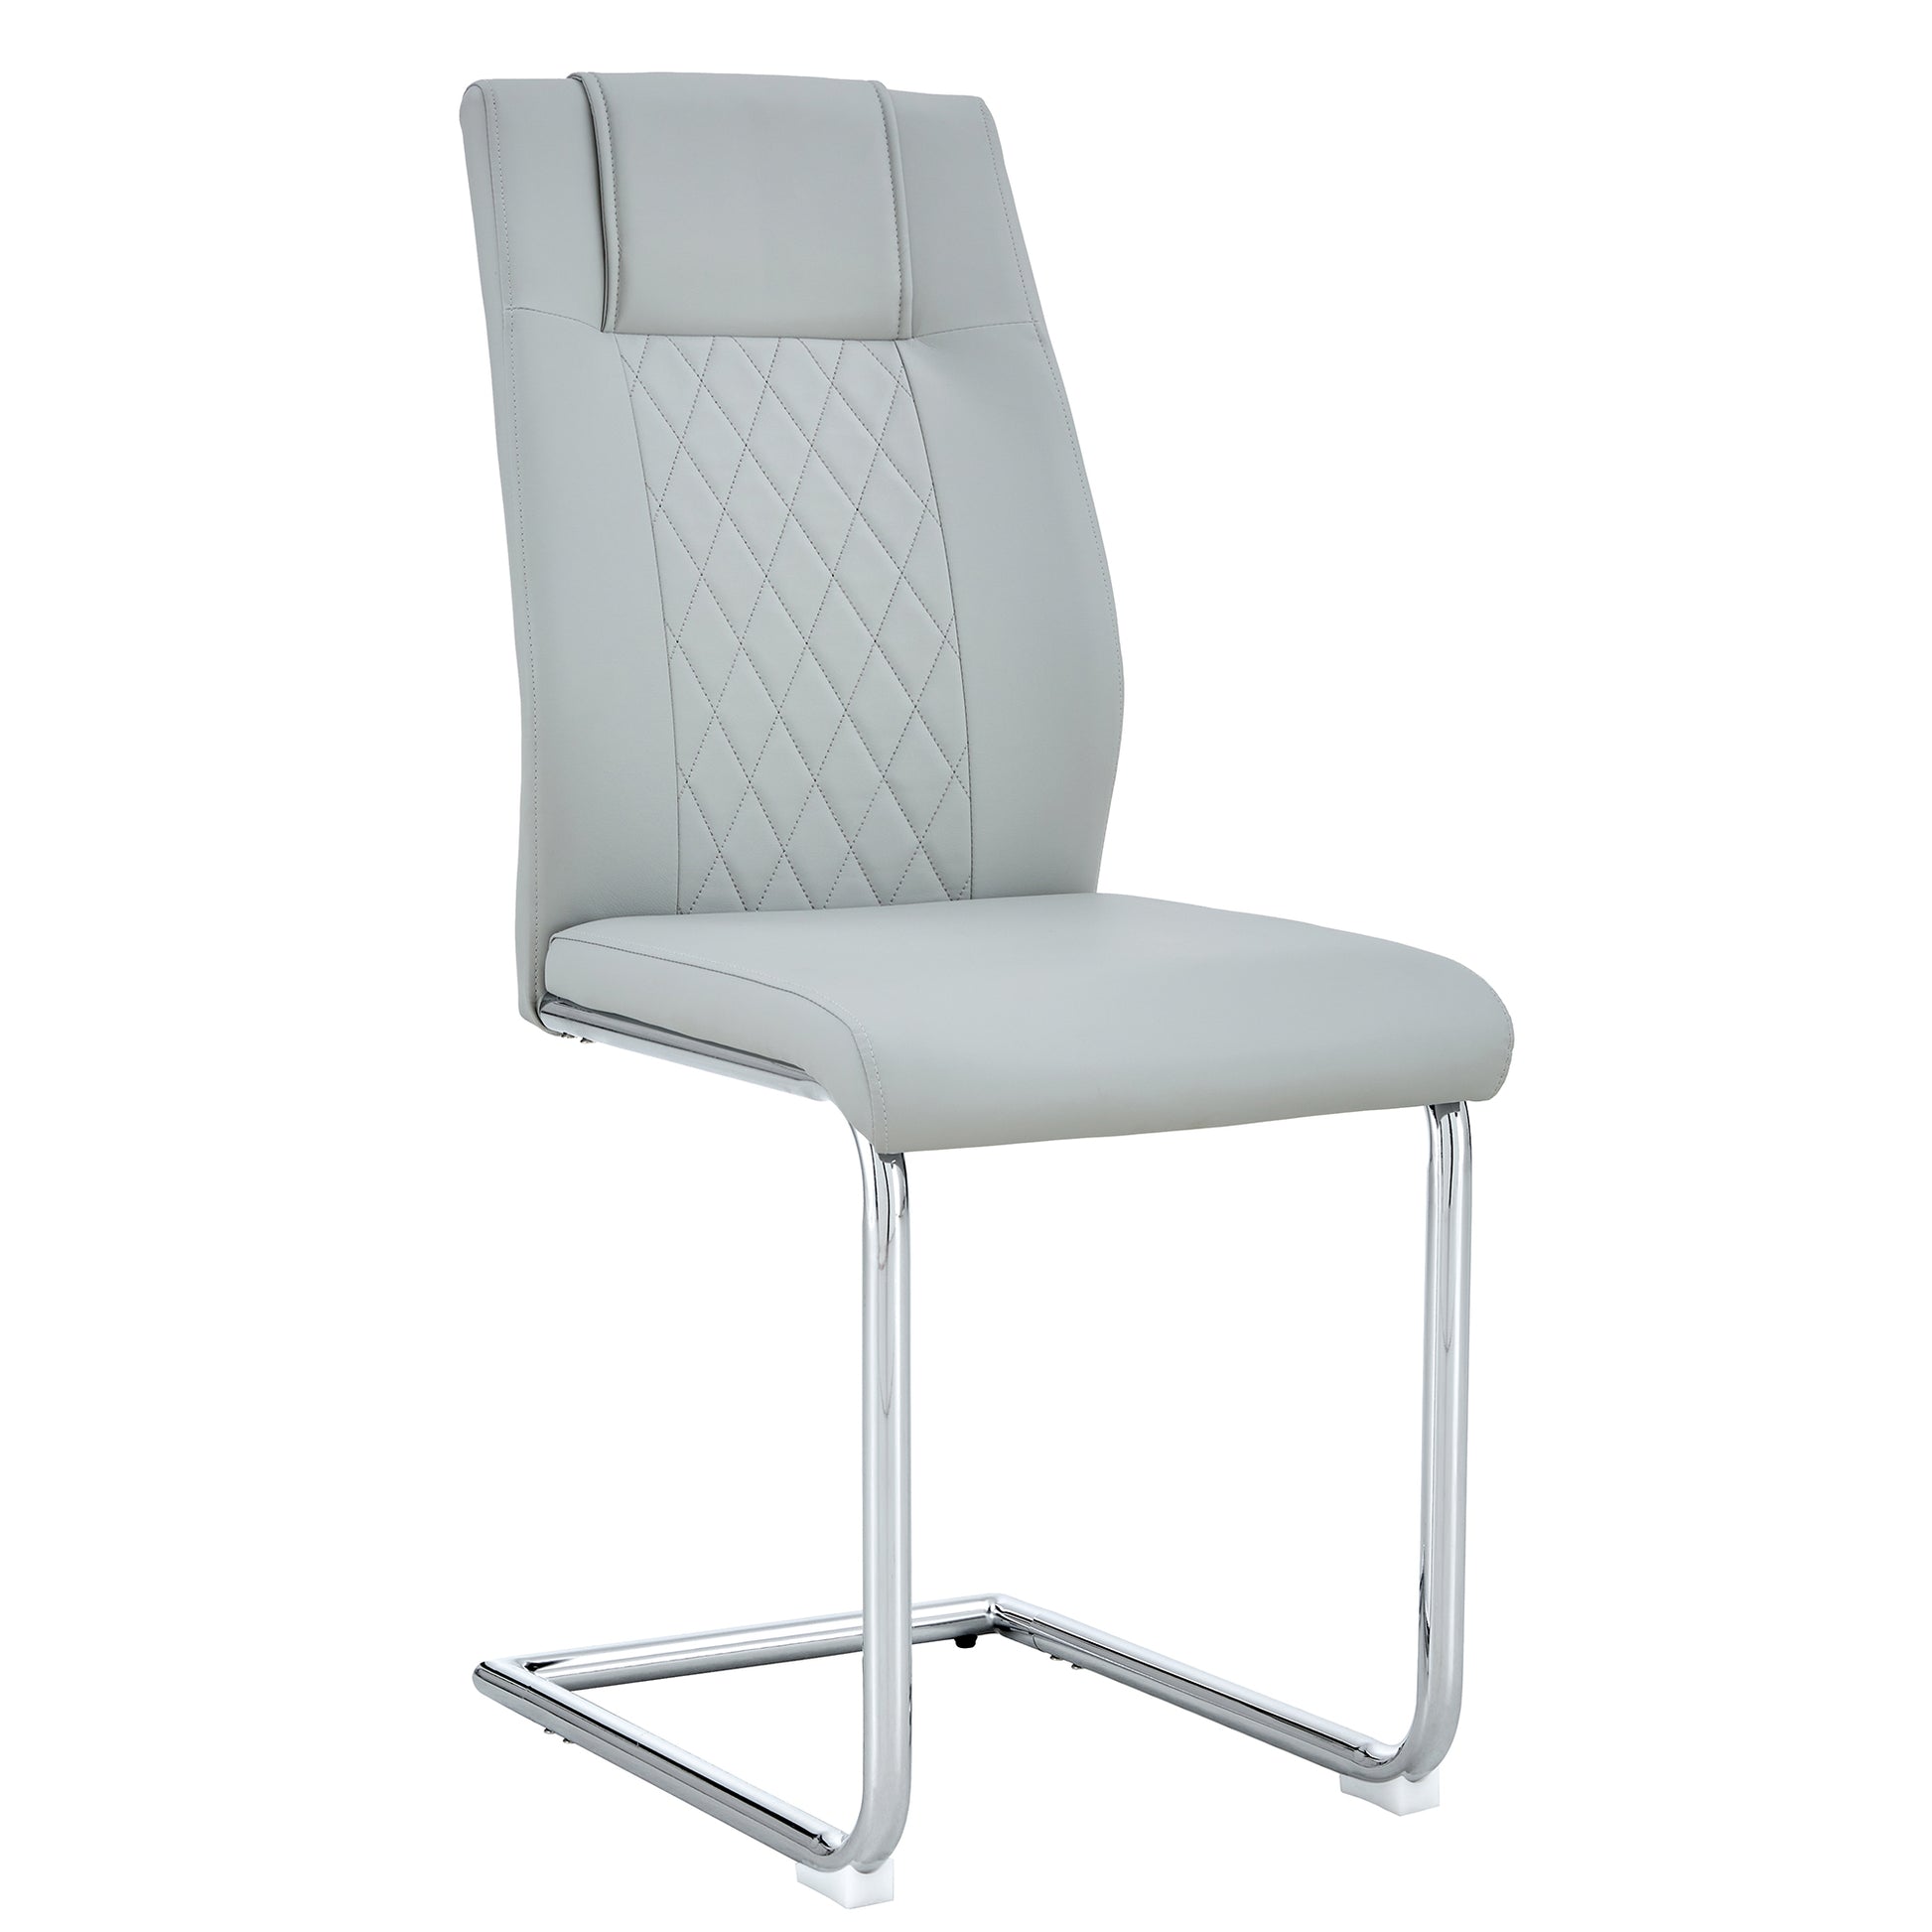 Living room chairs with metal legs - Ukerr Home